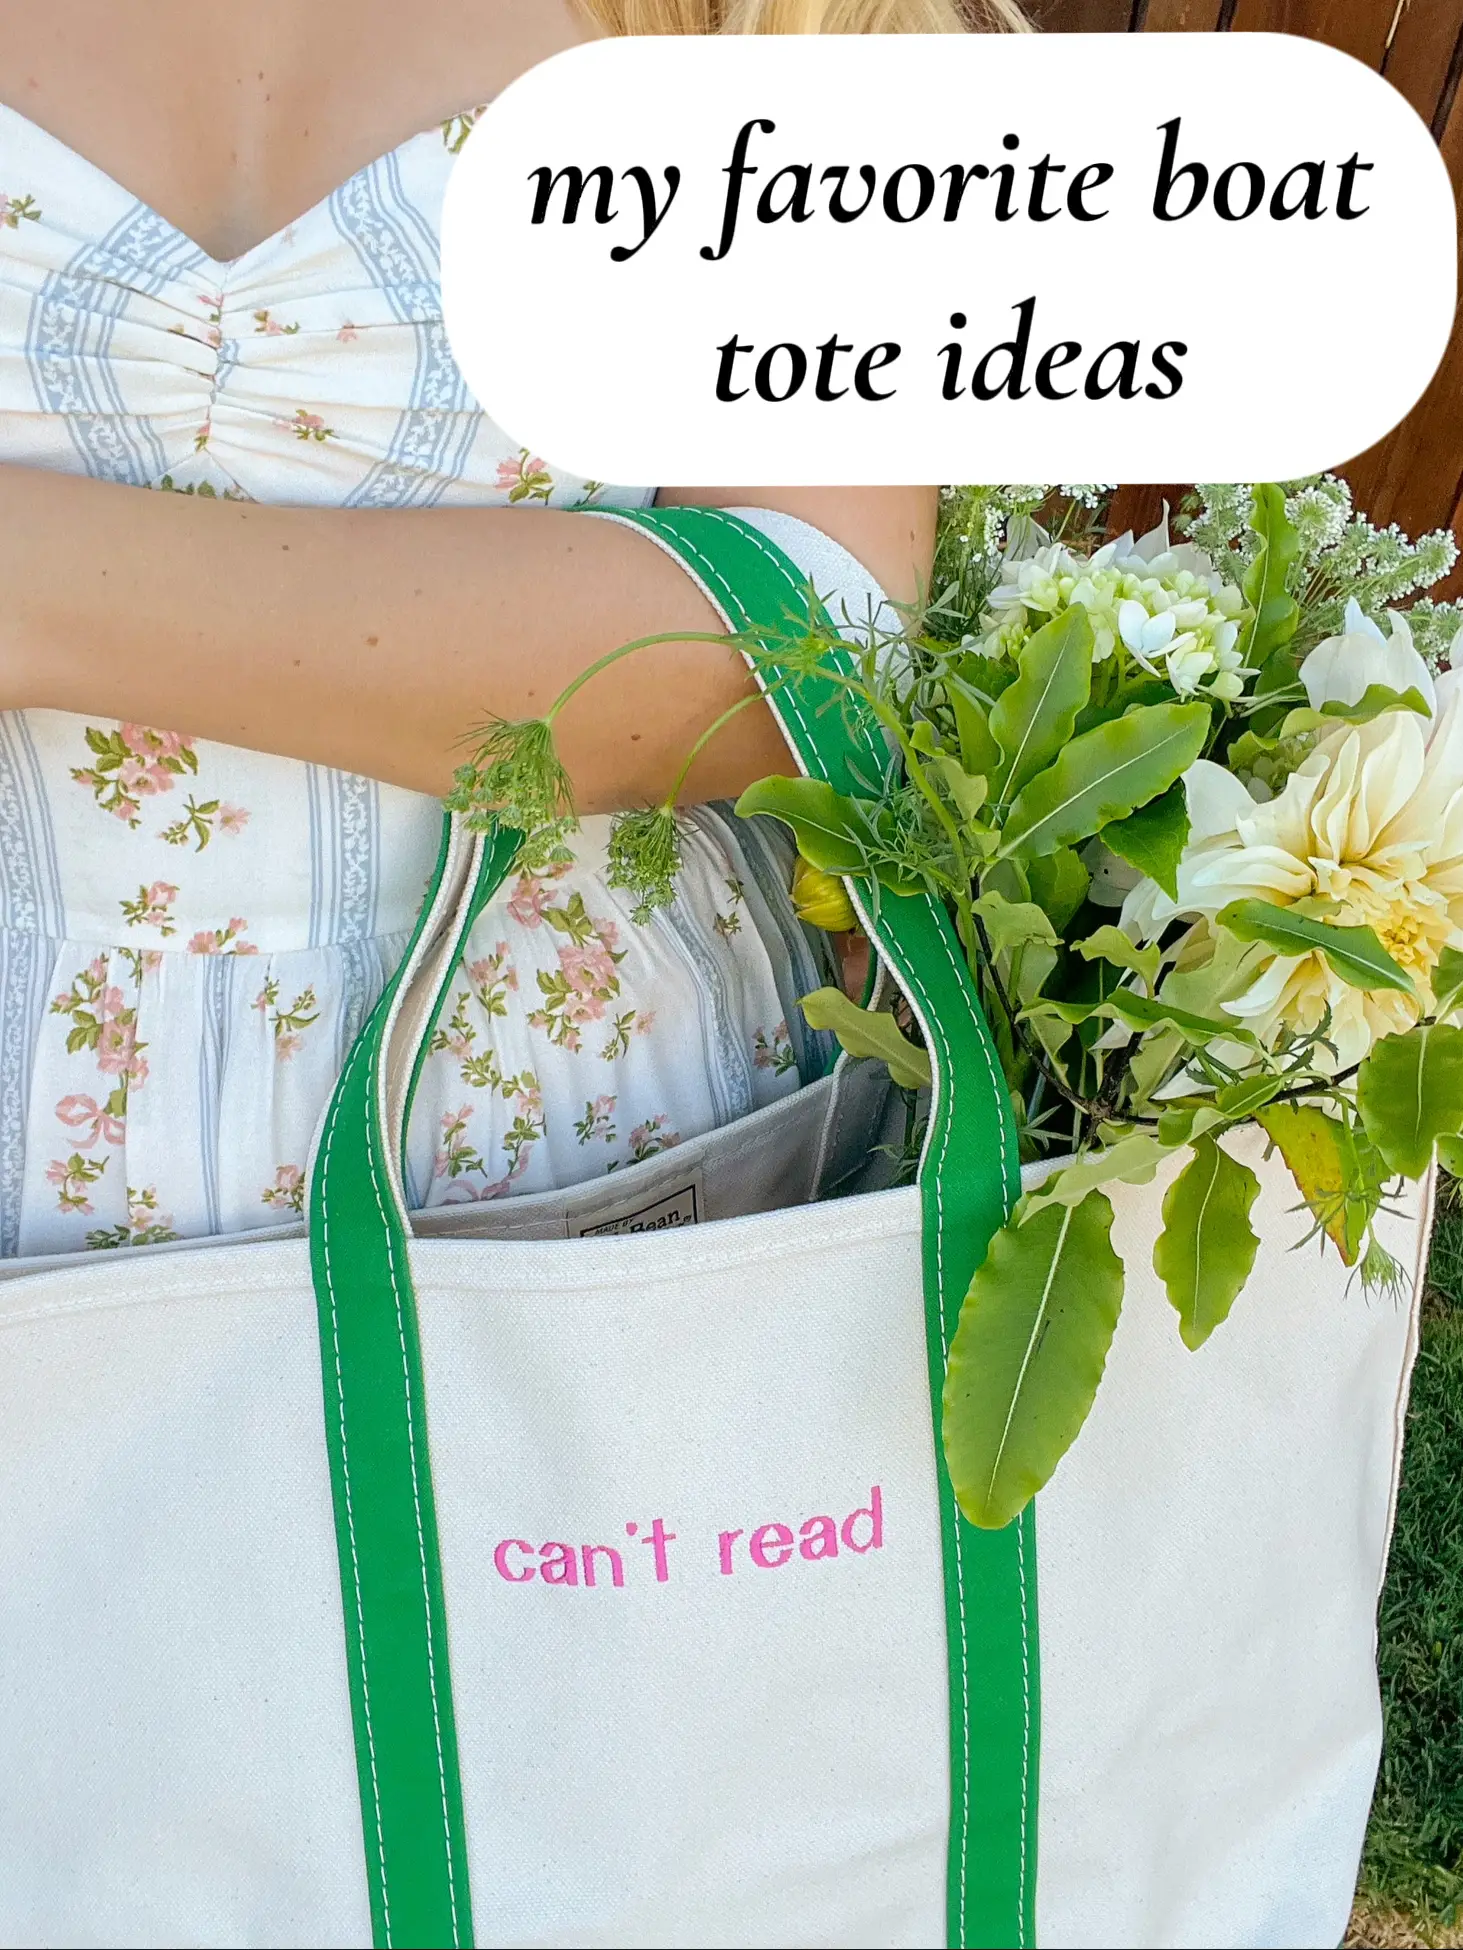 ironic boat and tote ideas